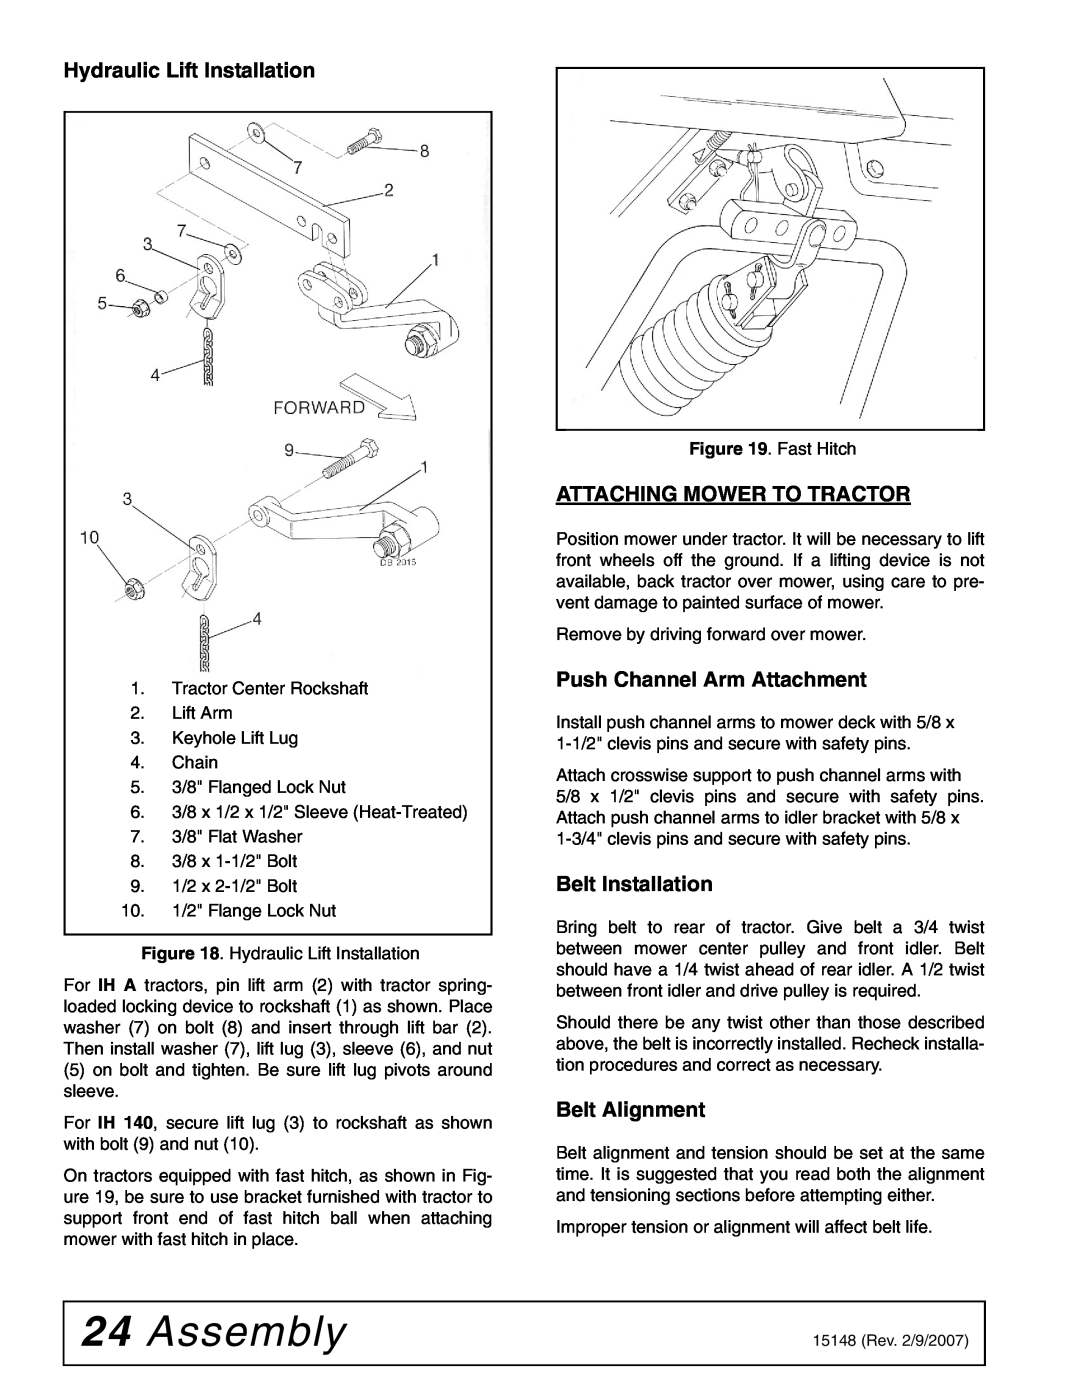 Woods Equipment L59A-3 Assembly, Hydraulic Lift Installation, Attaching Mower To Tractor, Push Channel Arm Attachment 